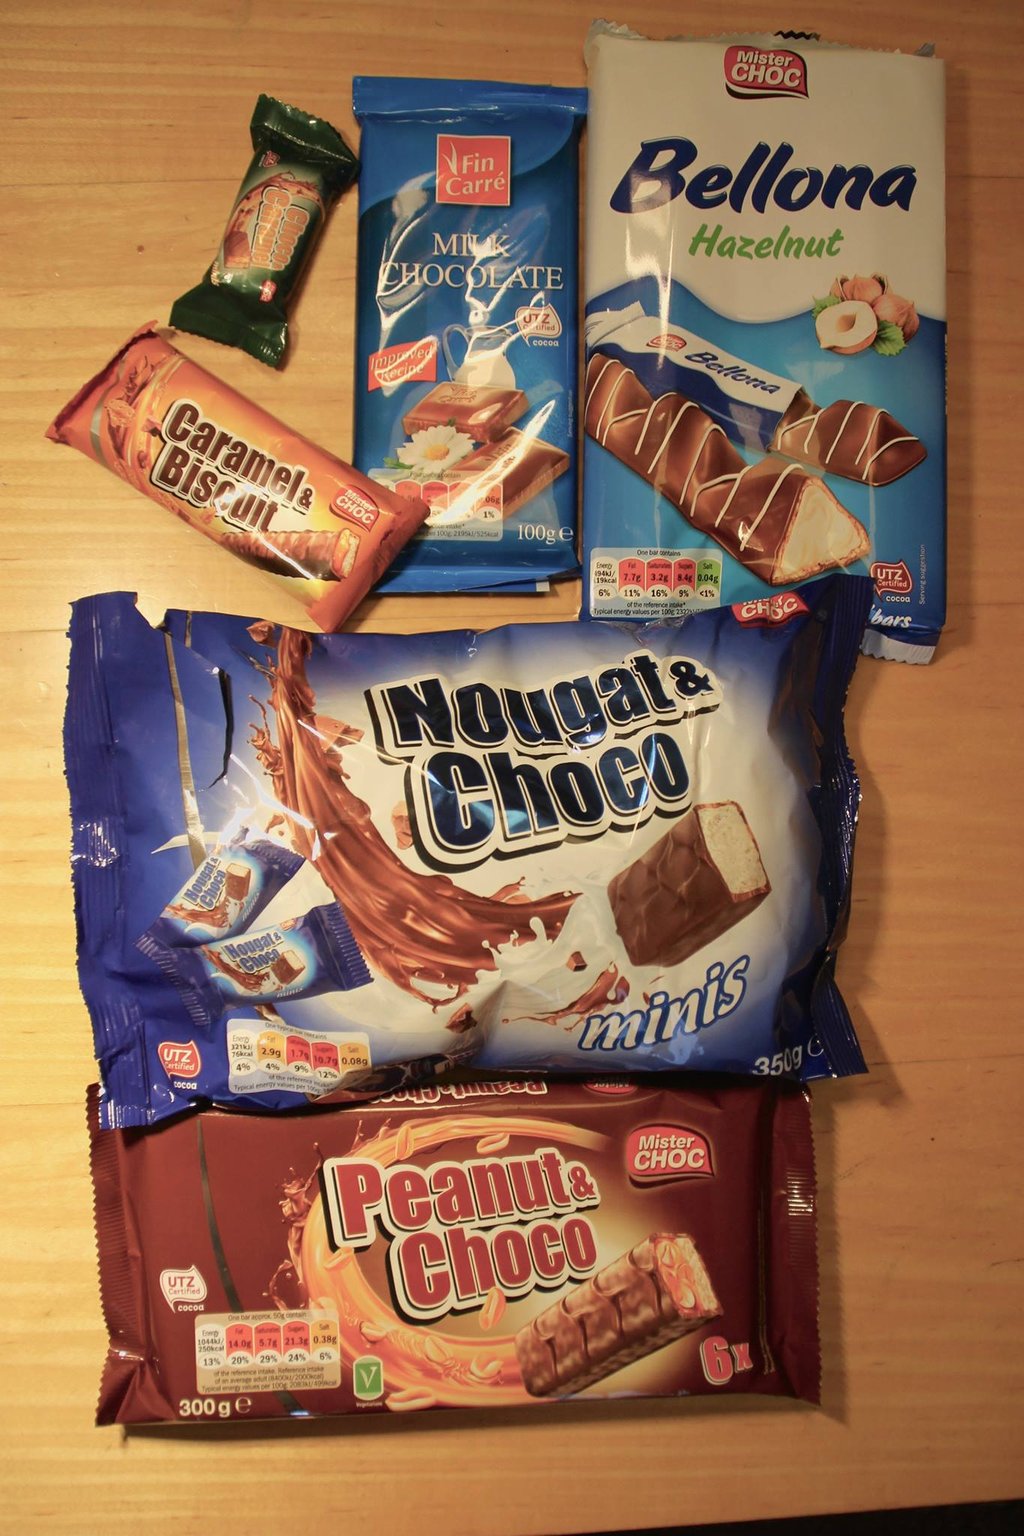 A Comparison of Lidl Chocolates Bars to Name Chocolate Brand